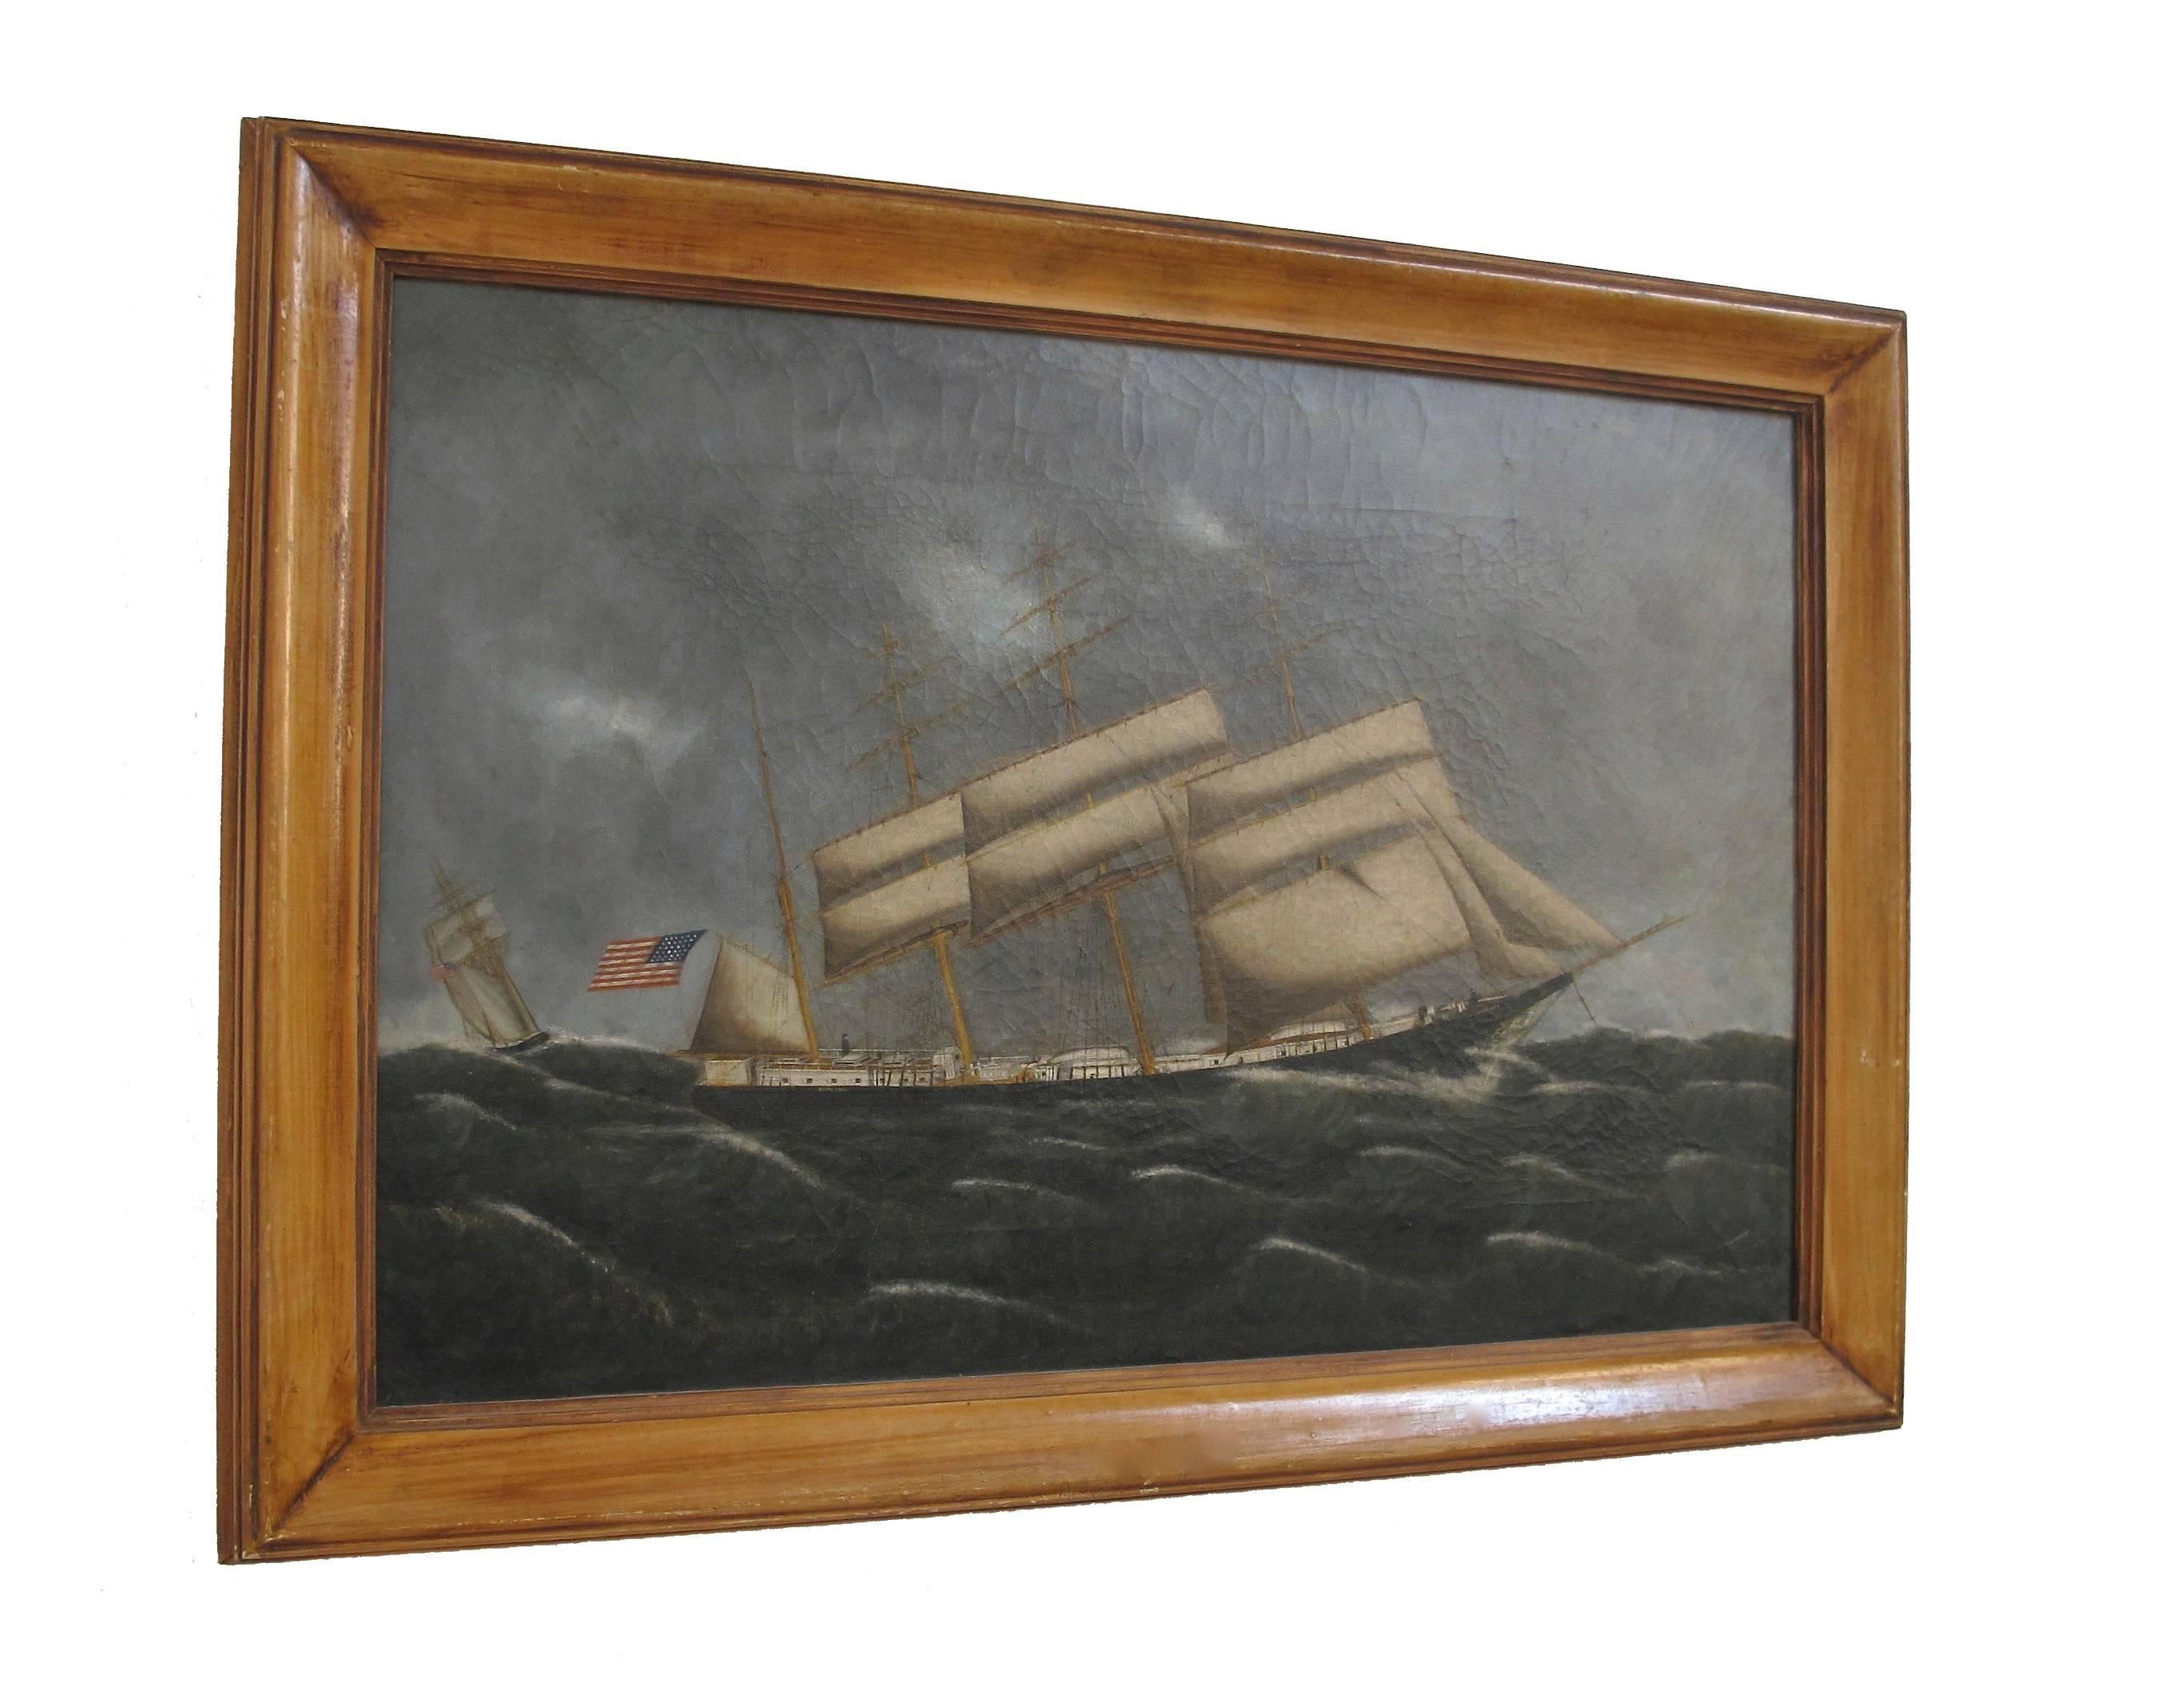 Hand-Painted American Ship Oil Painting, 19th Century Maritime